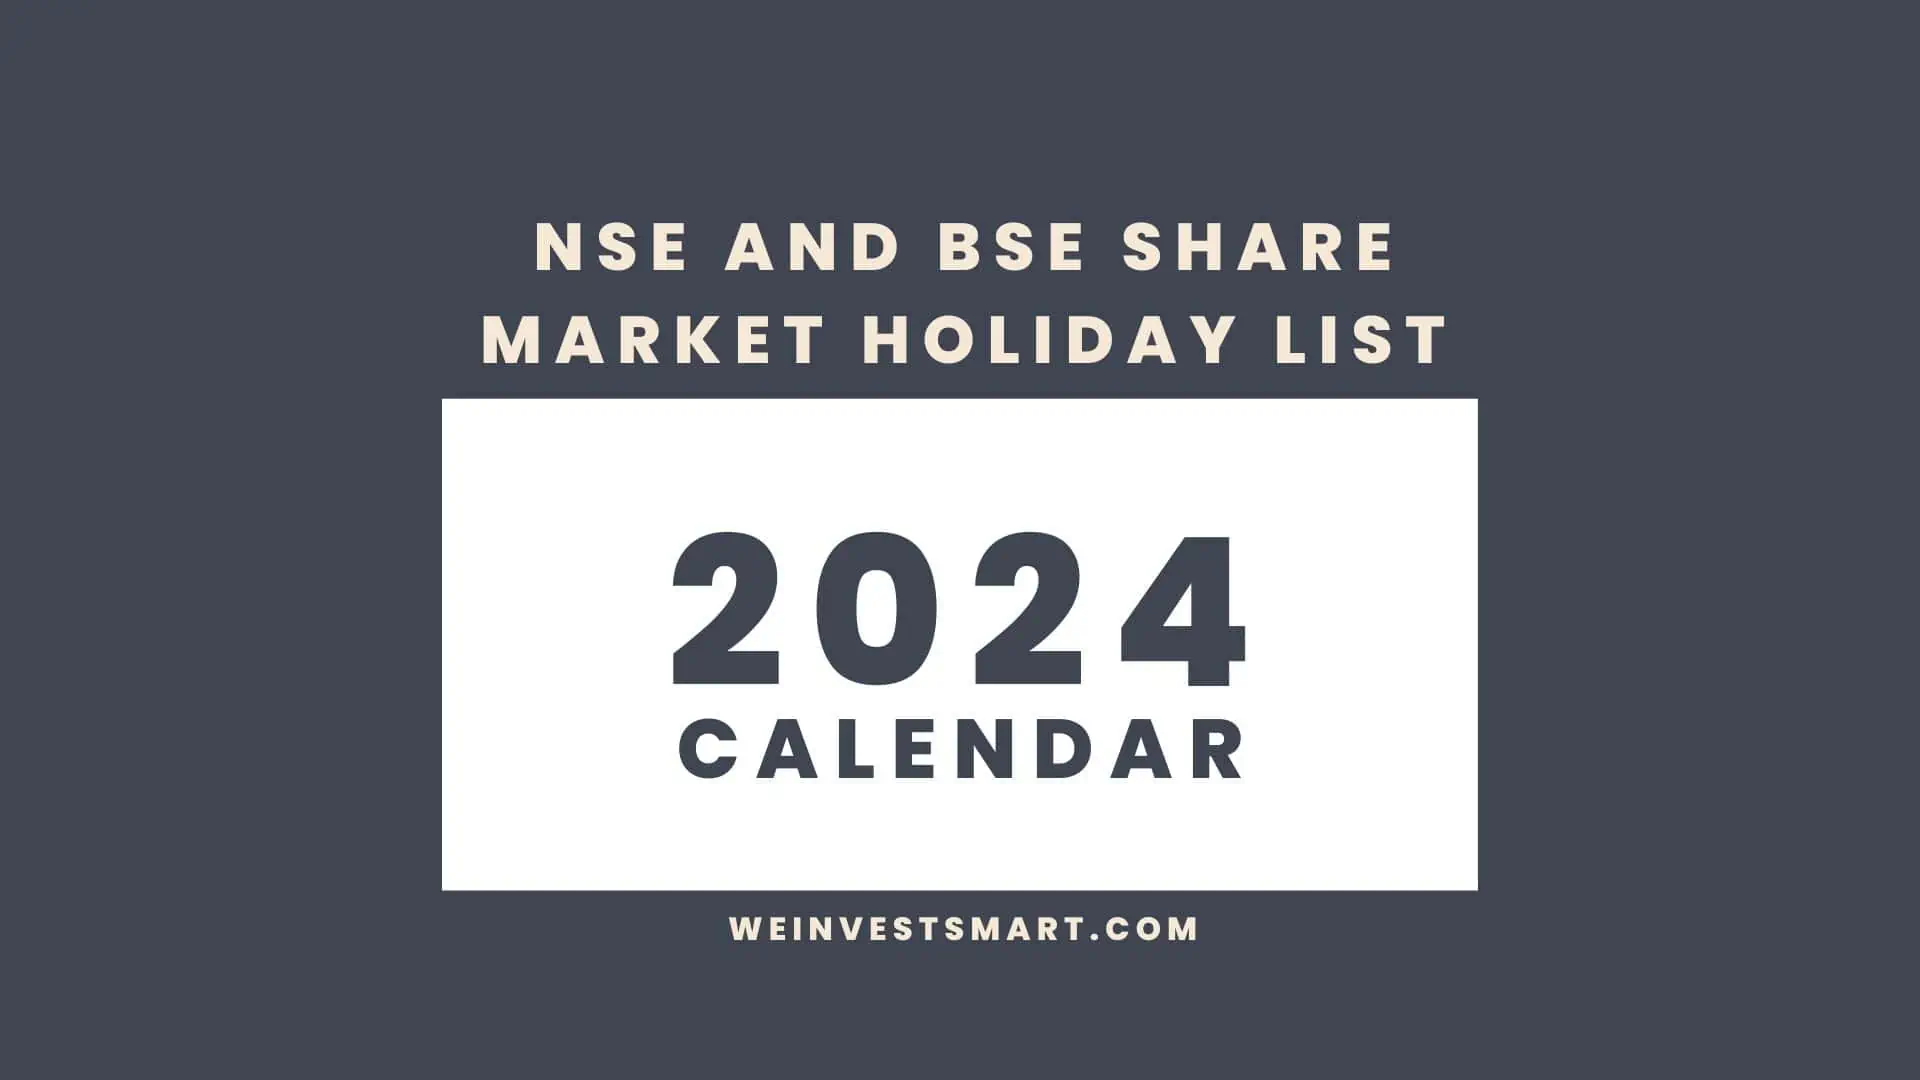 Share Market Holiday List in 2024 for NSE and BSE